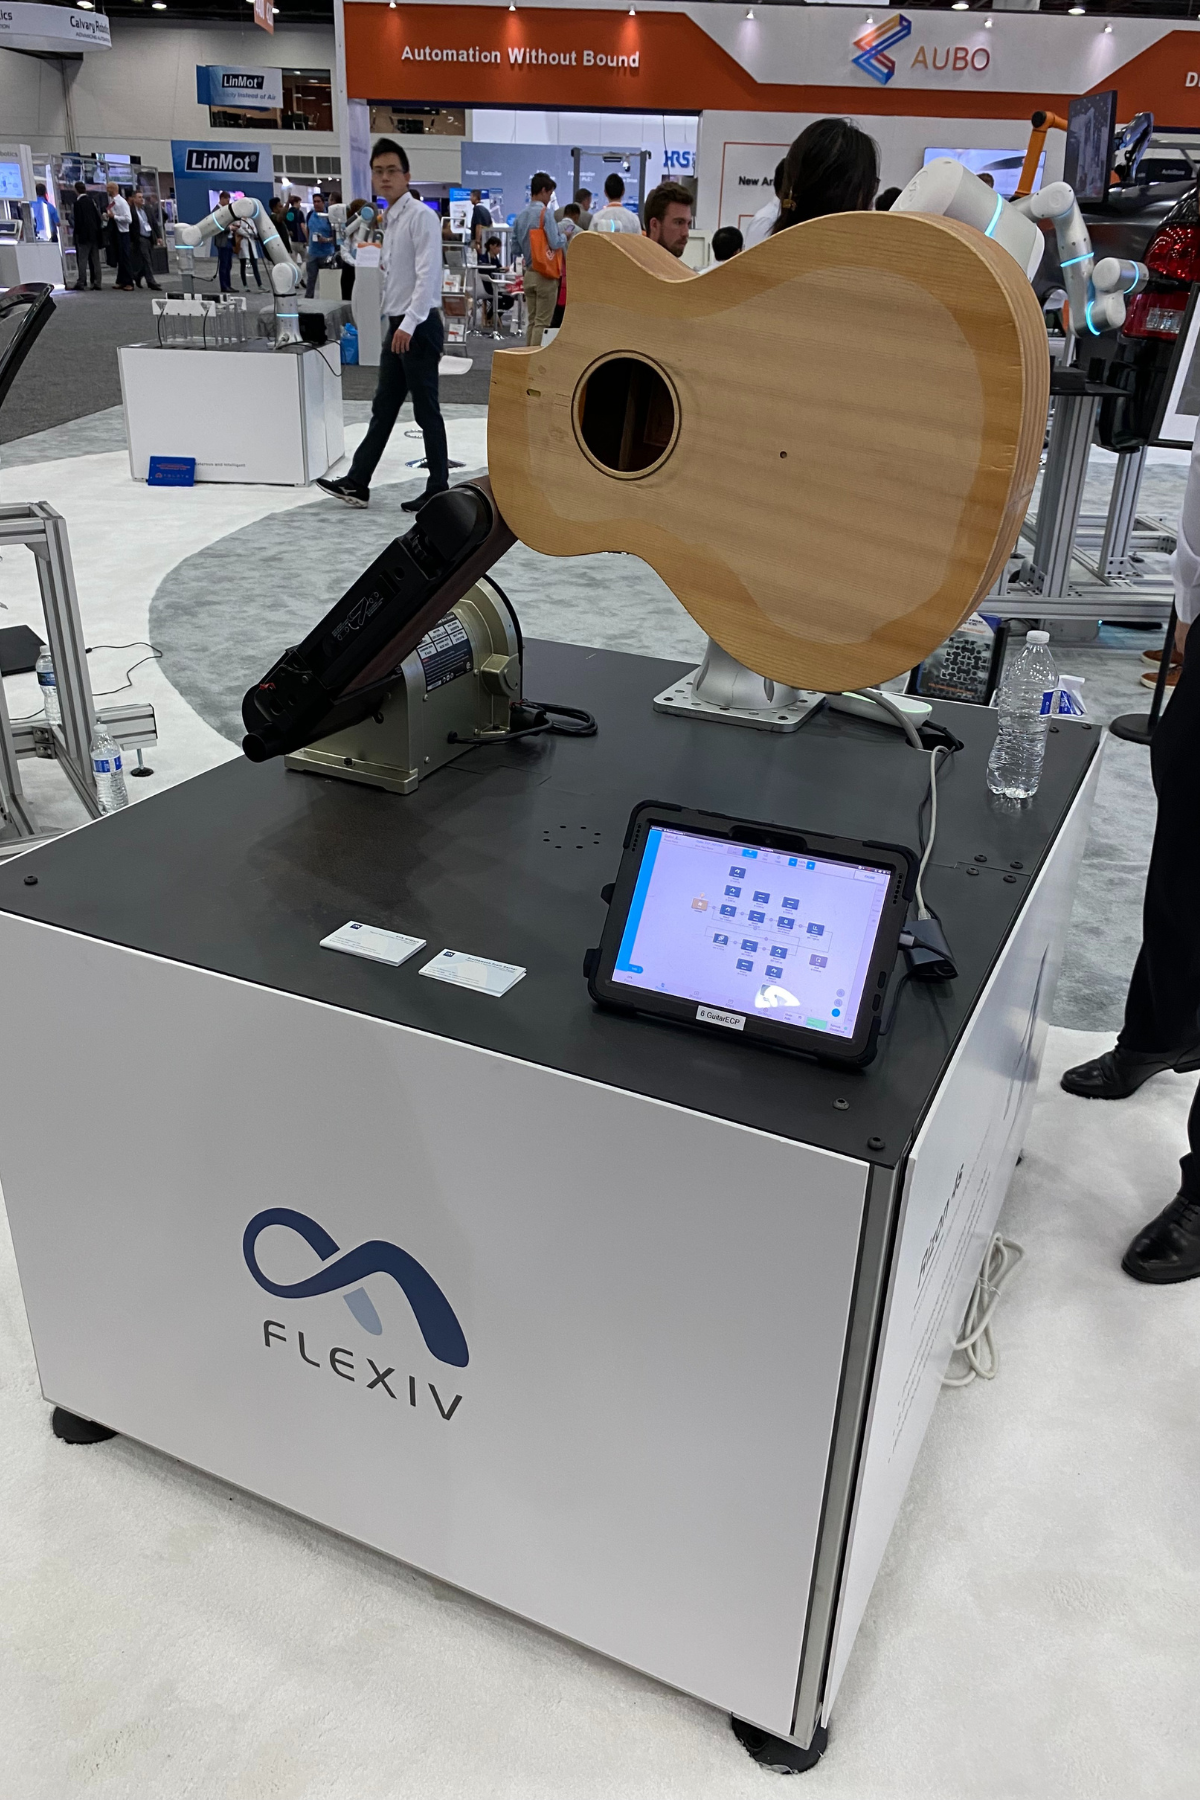 Image 1: Flexiv booth at Automate 2023 displaying robot precision by sanding a guitar.